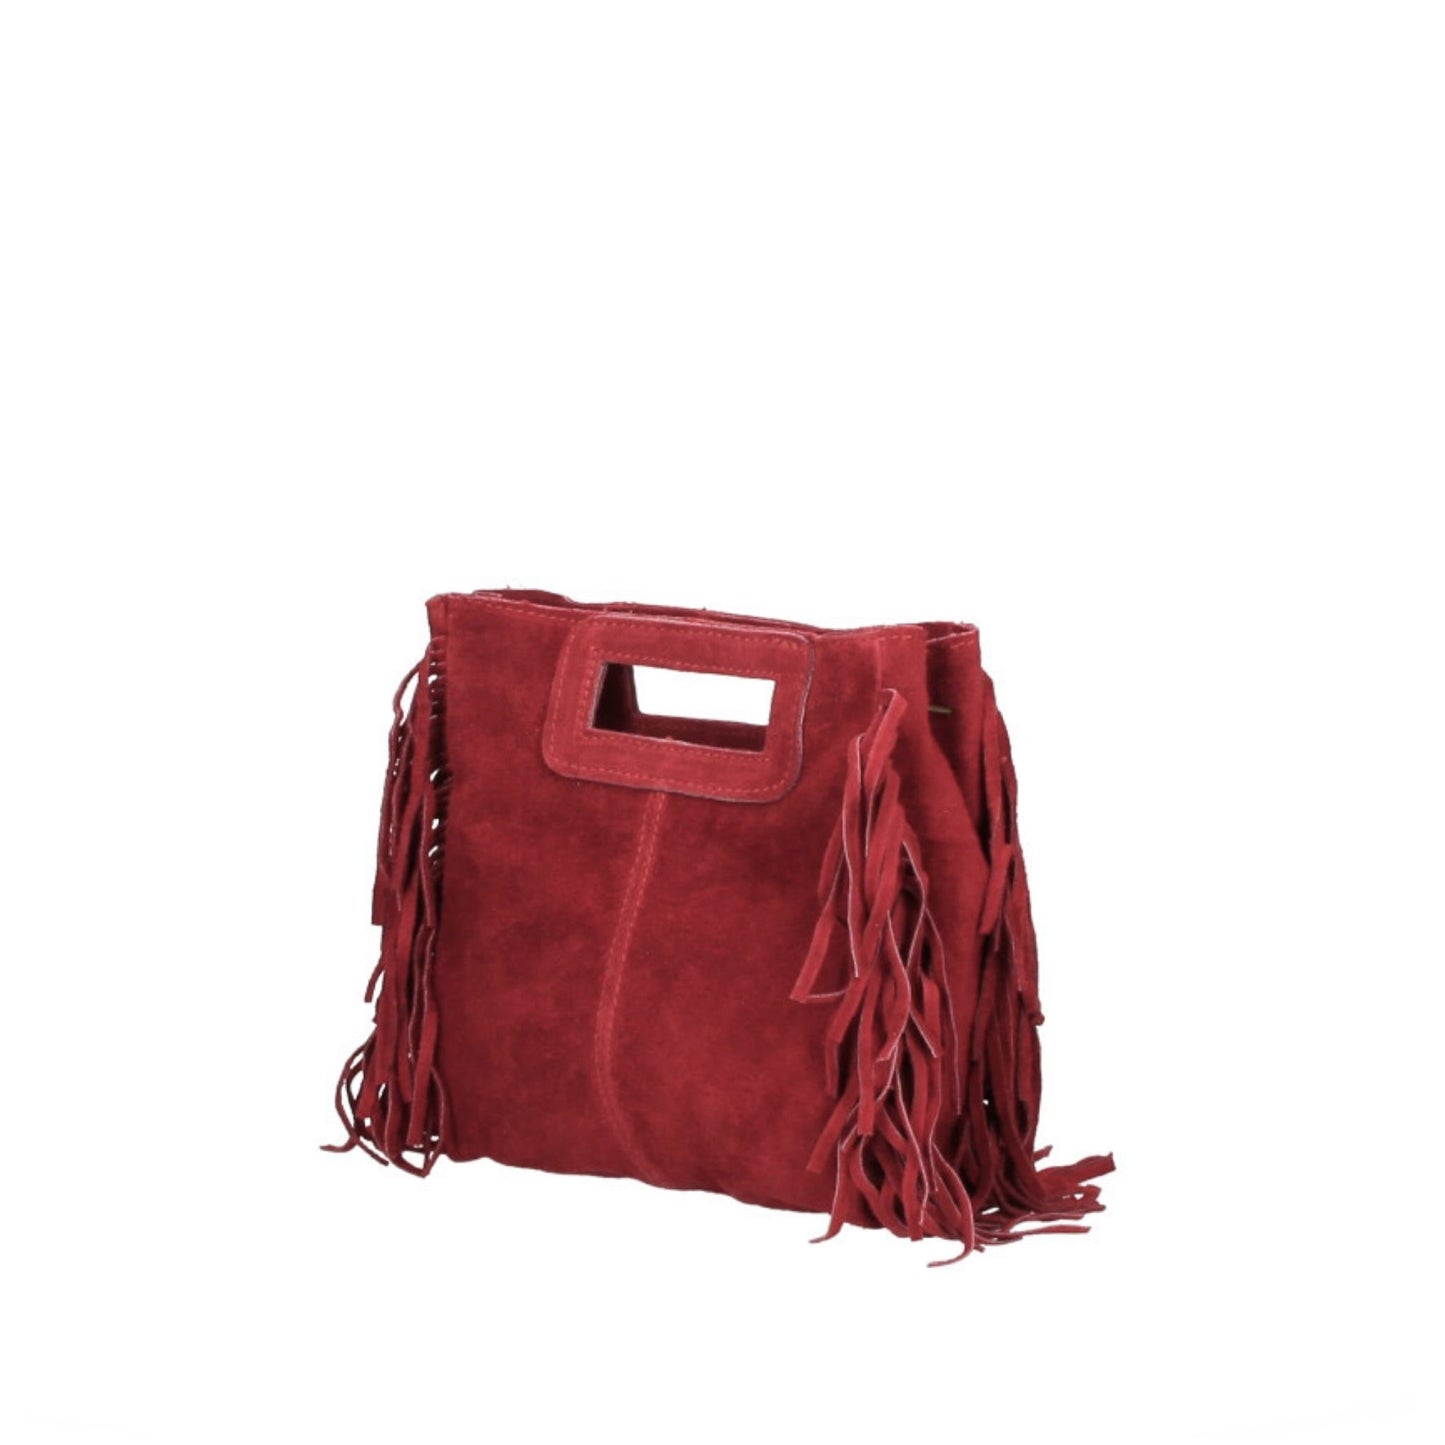 The Suede Fringed Square Bag